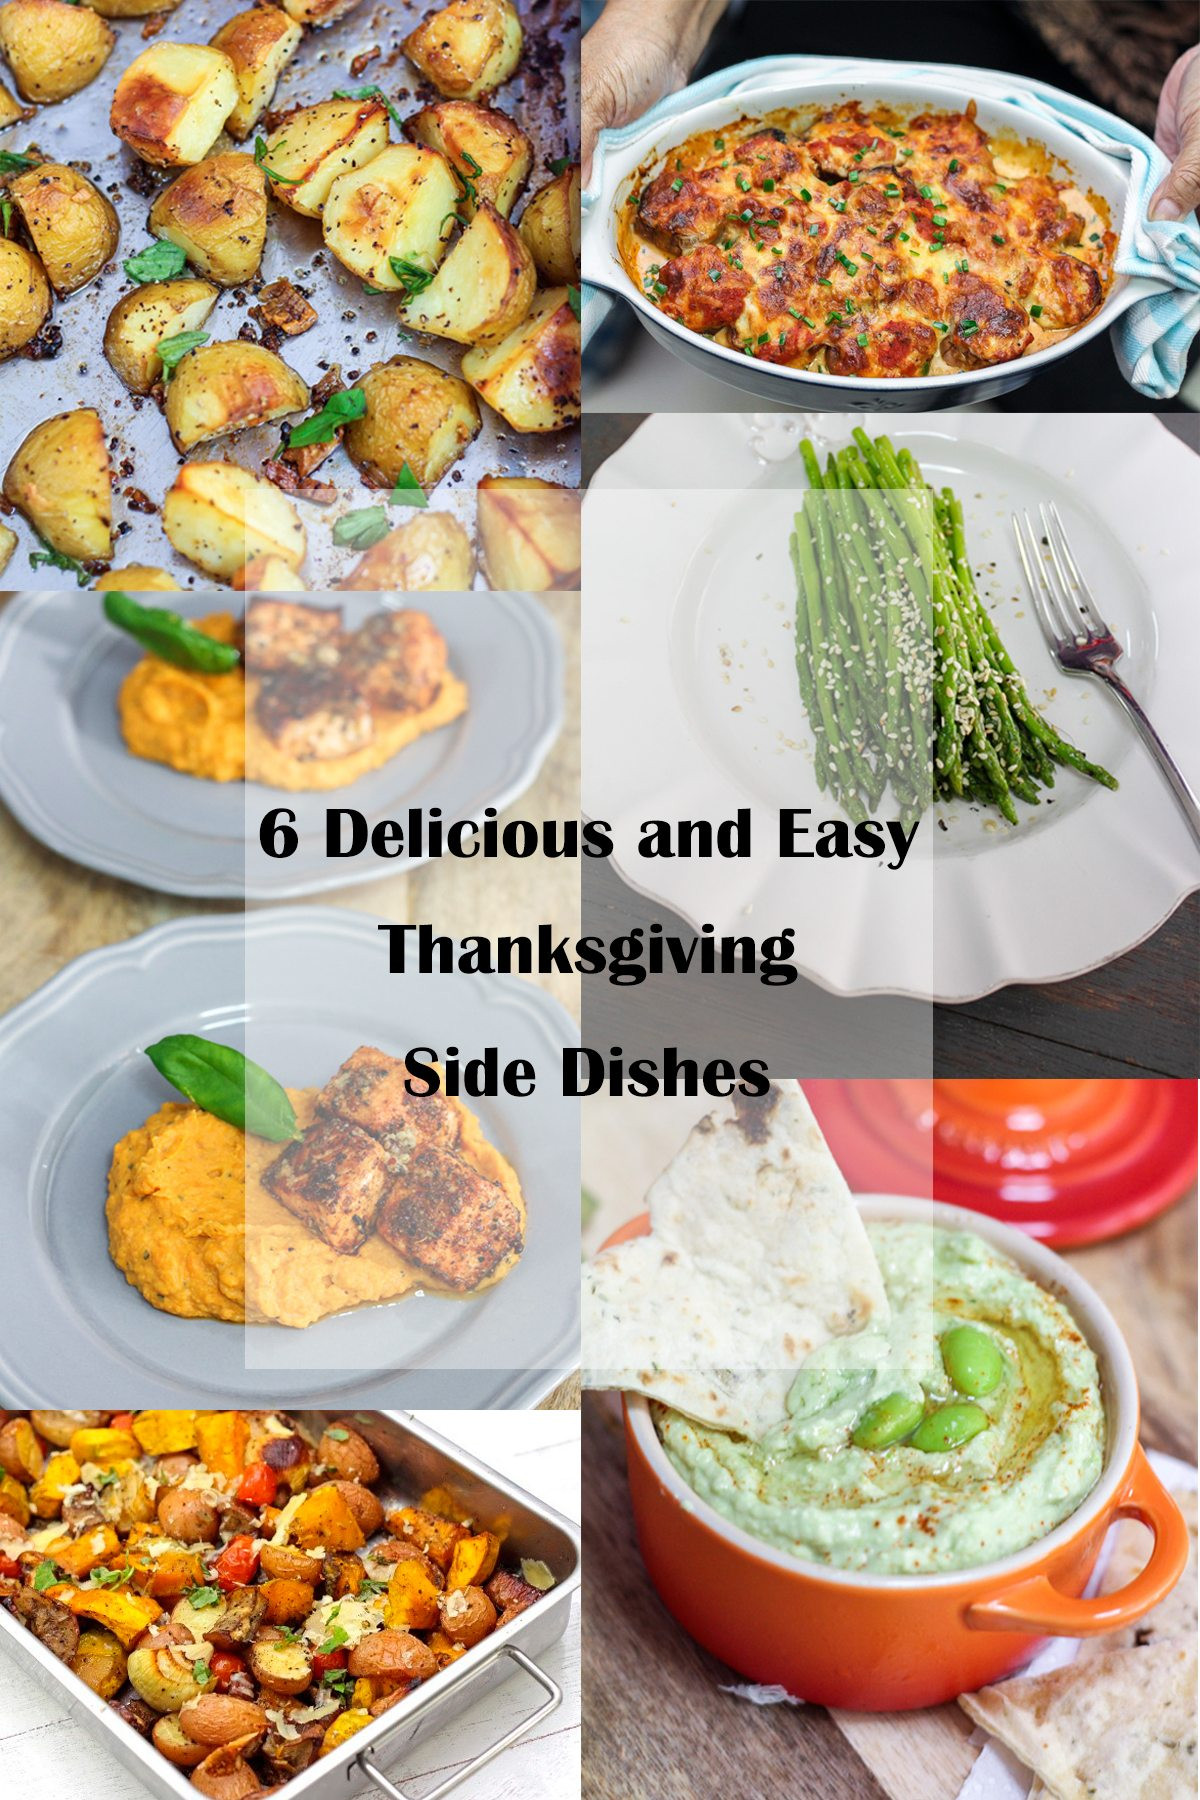 Easy Side Dishes For Thanksgiving
 6 Delicious and Easy Thanksgiving Side Dishes